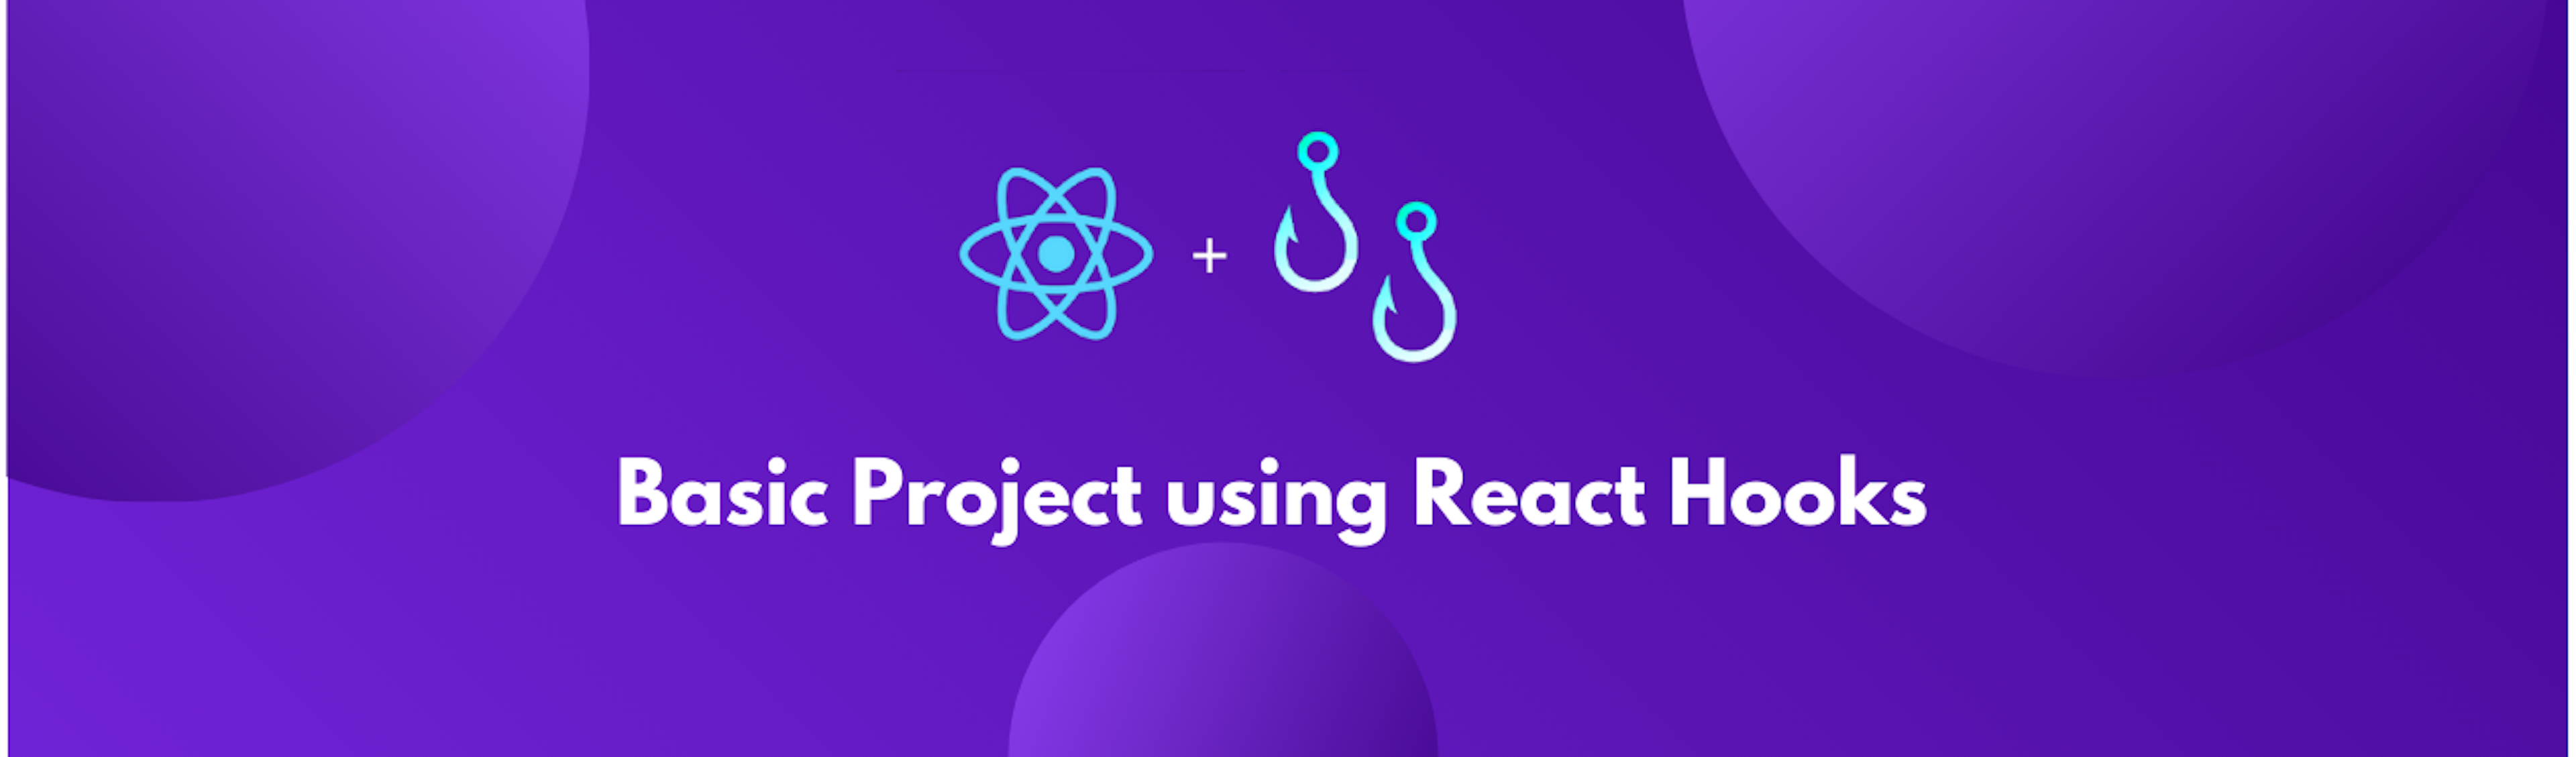 How to Build Basic Projects Using React Hooks | A Step-by-step Guide